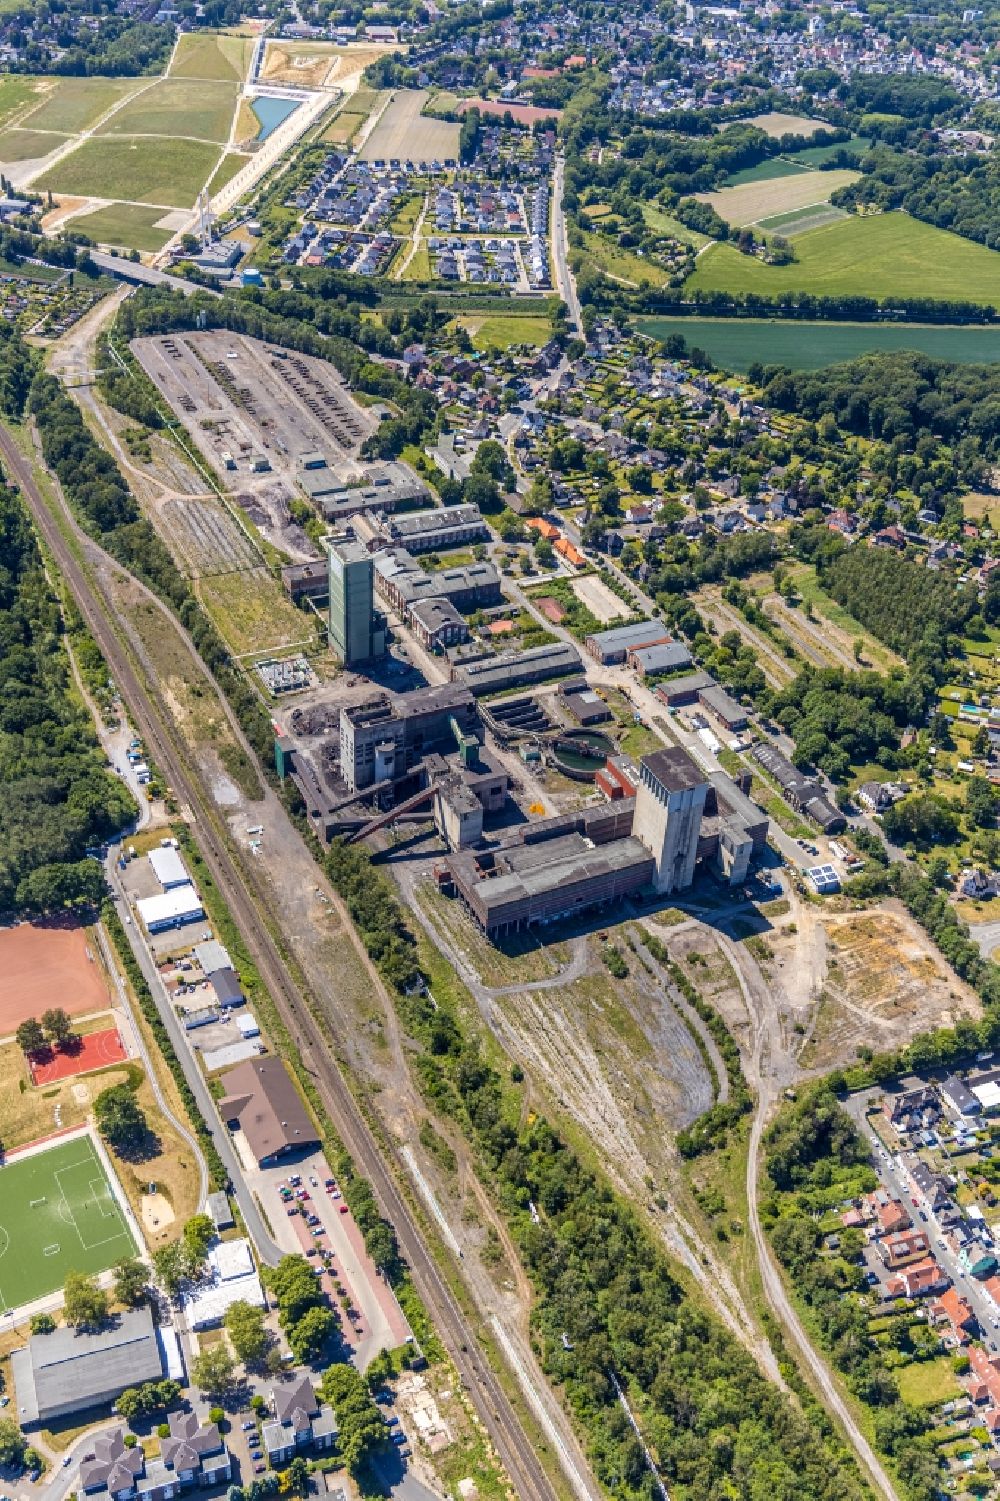 Aerial photograph Gelsenkirchen - Demolition work on the site of the Industry- ruins of DSK Bergwerk Lippe in the district Westerhold in Gelsenkirchen in the state North Rhine-Westphalia, Germany